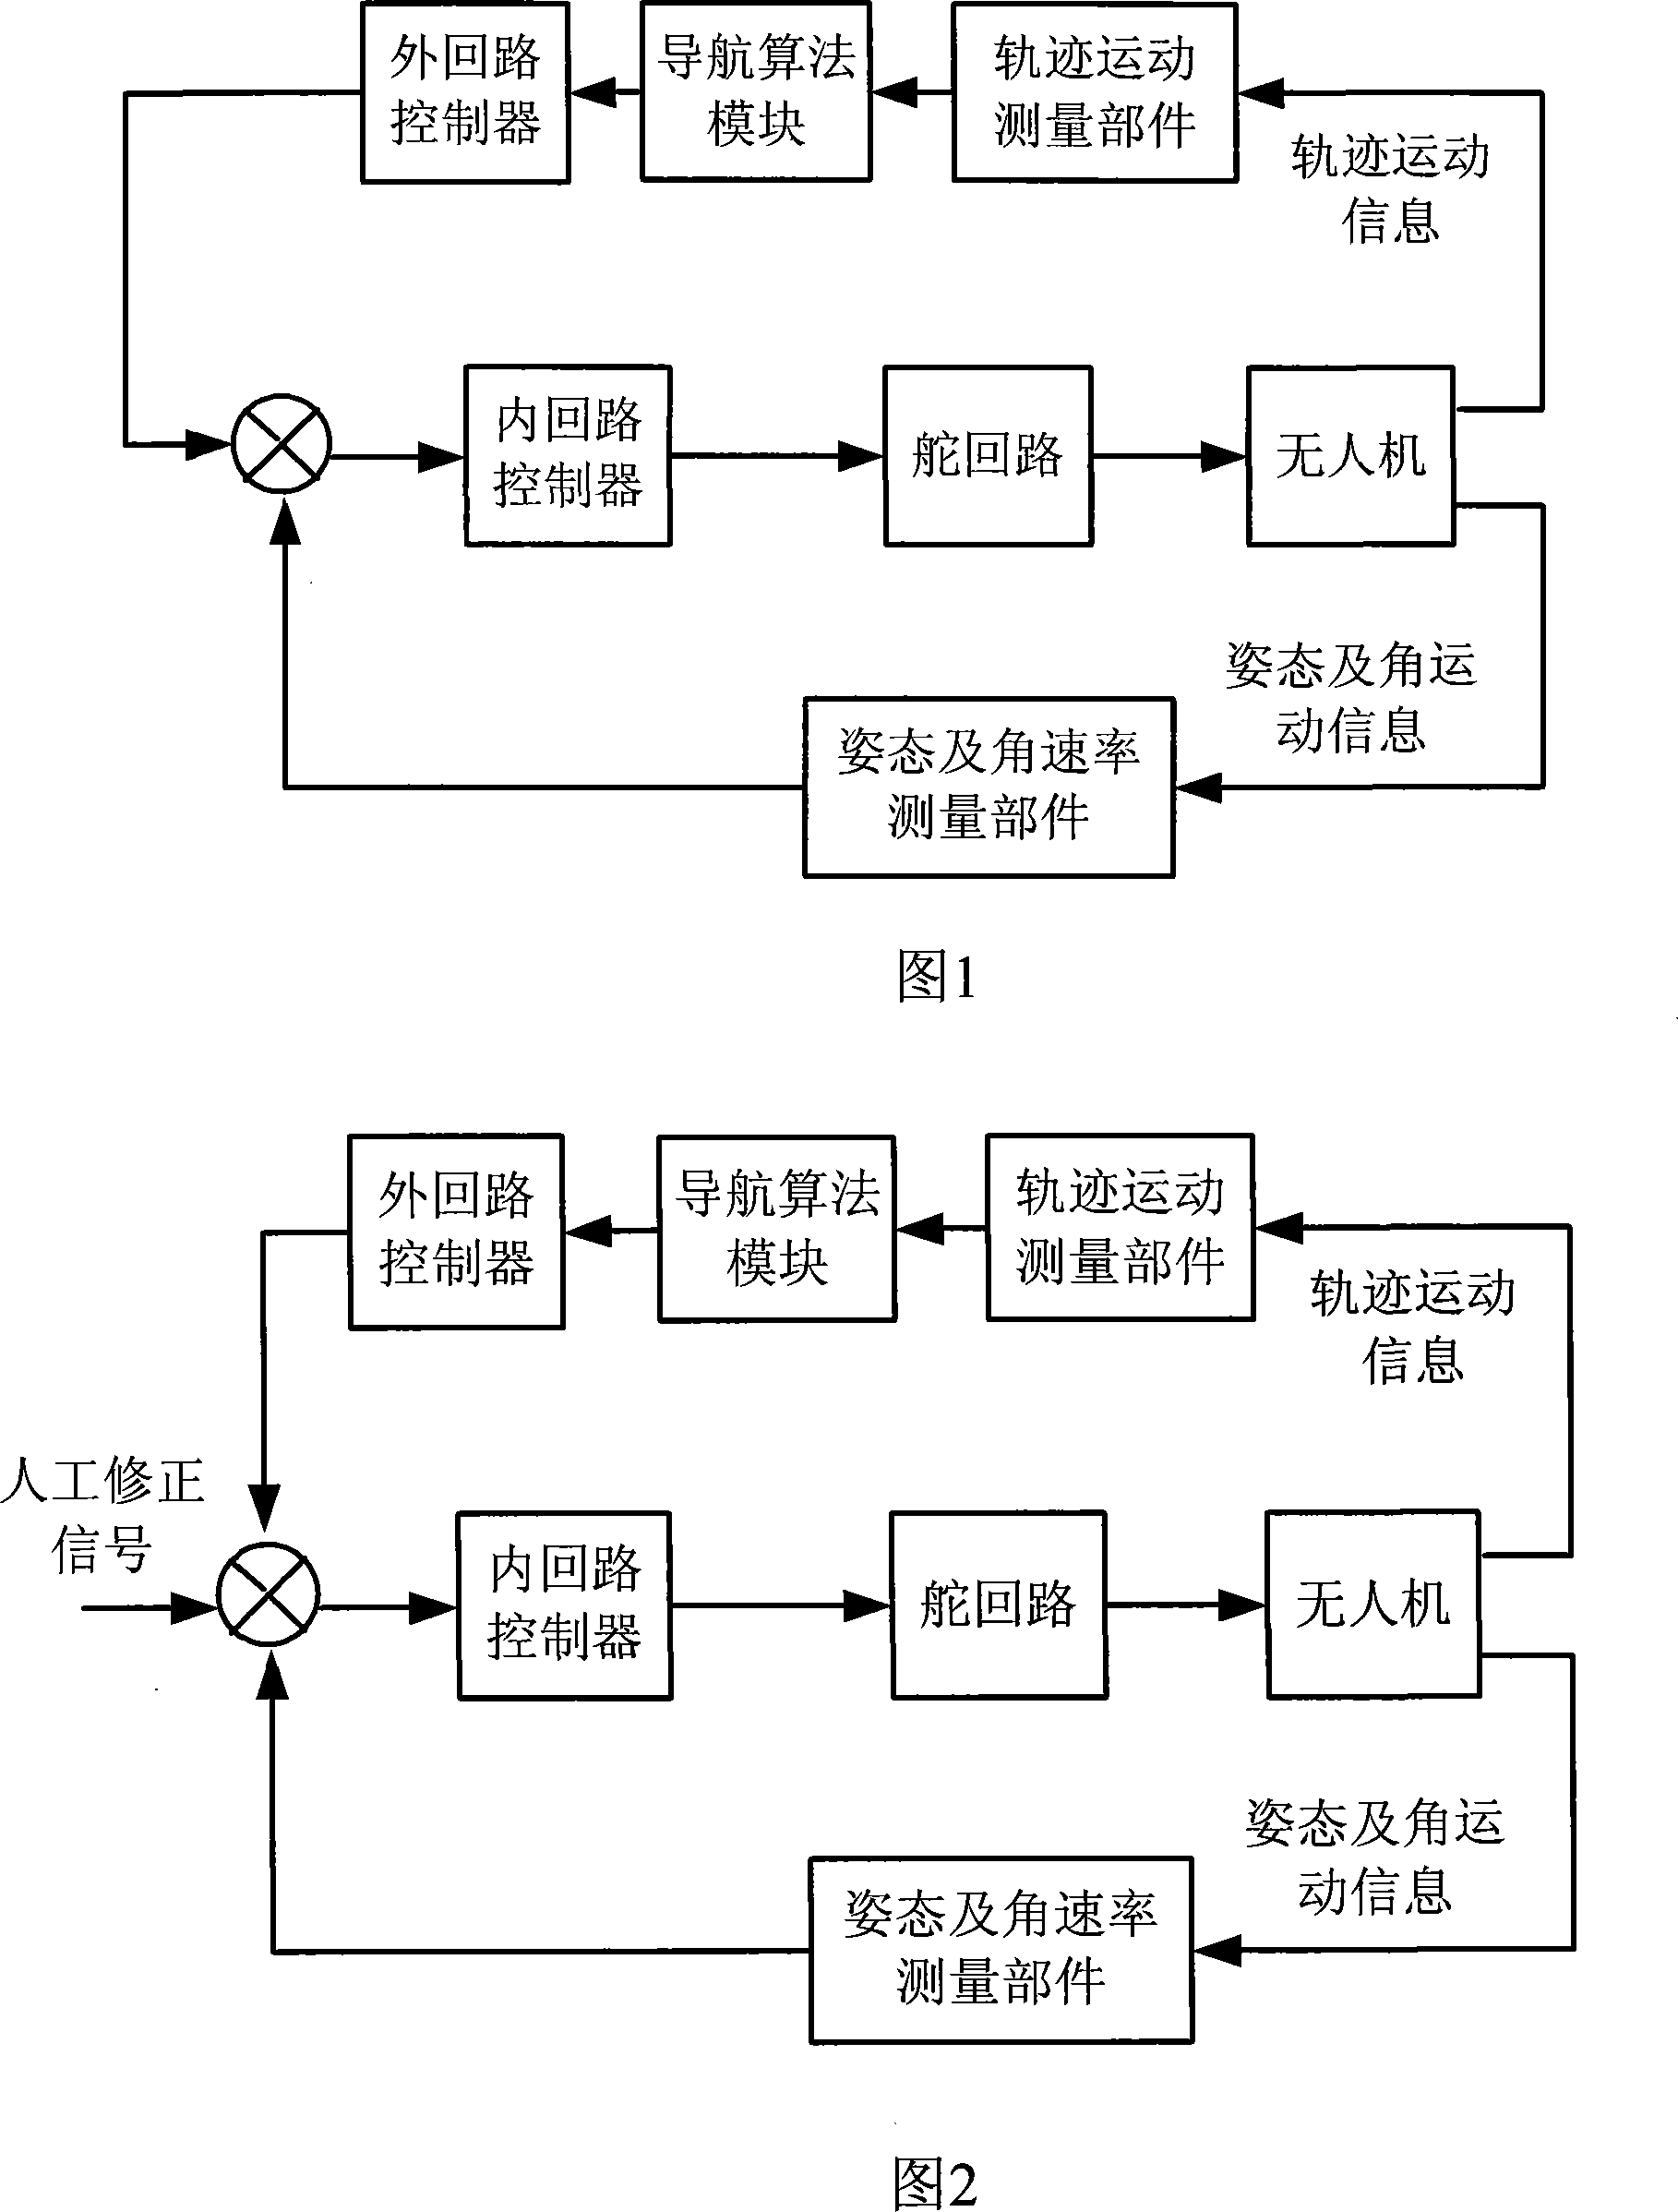 No-manned machine multi- mode control and switching method